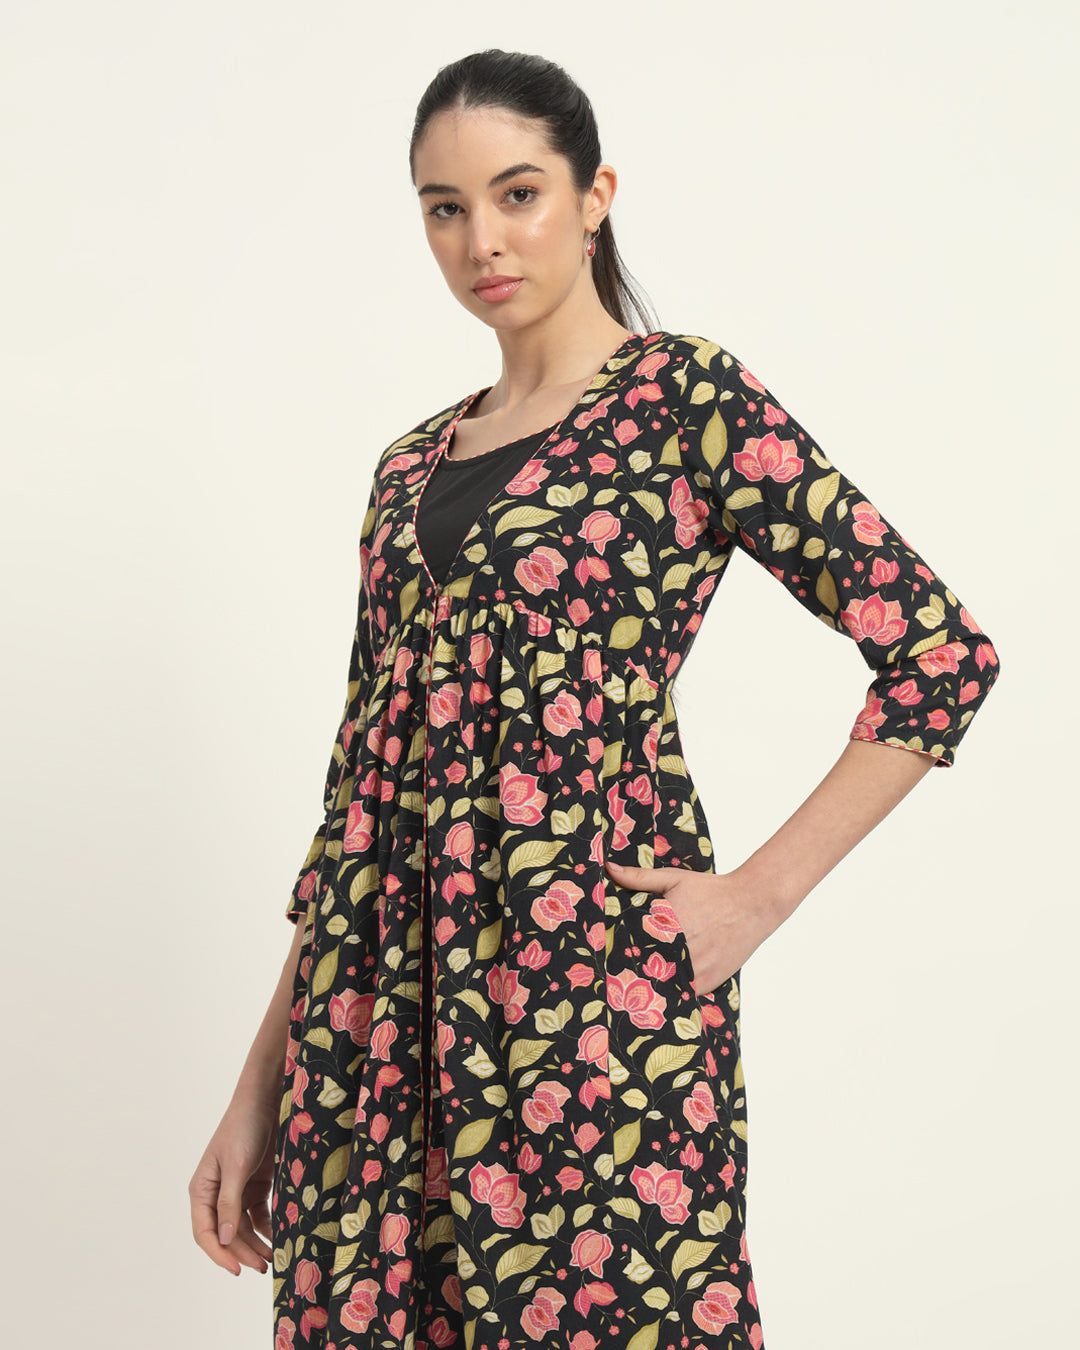 The Floral Wish Button Dress